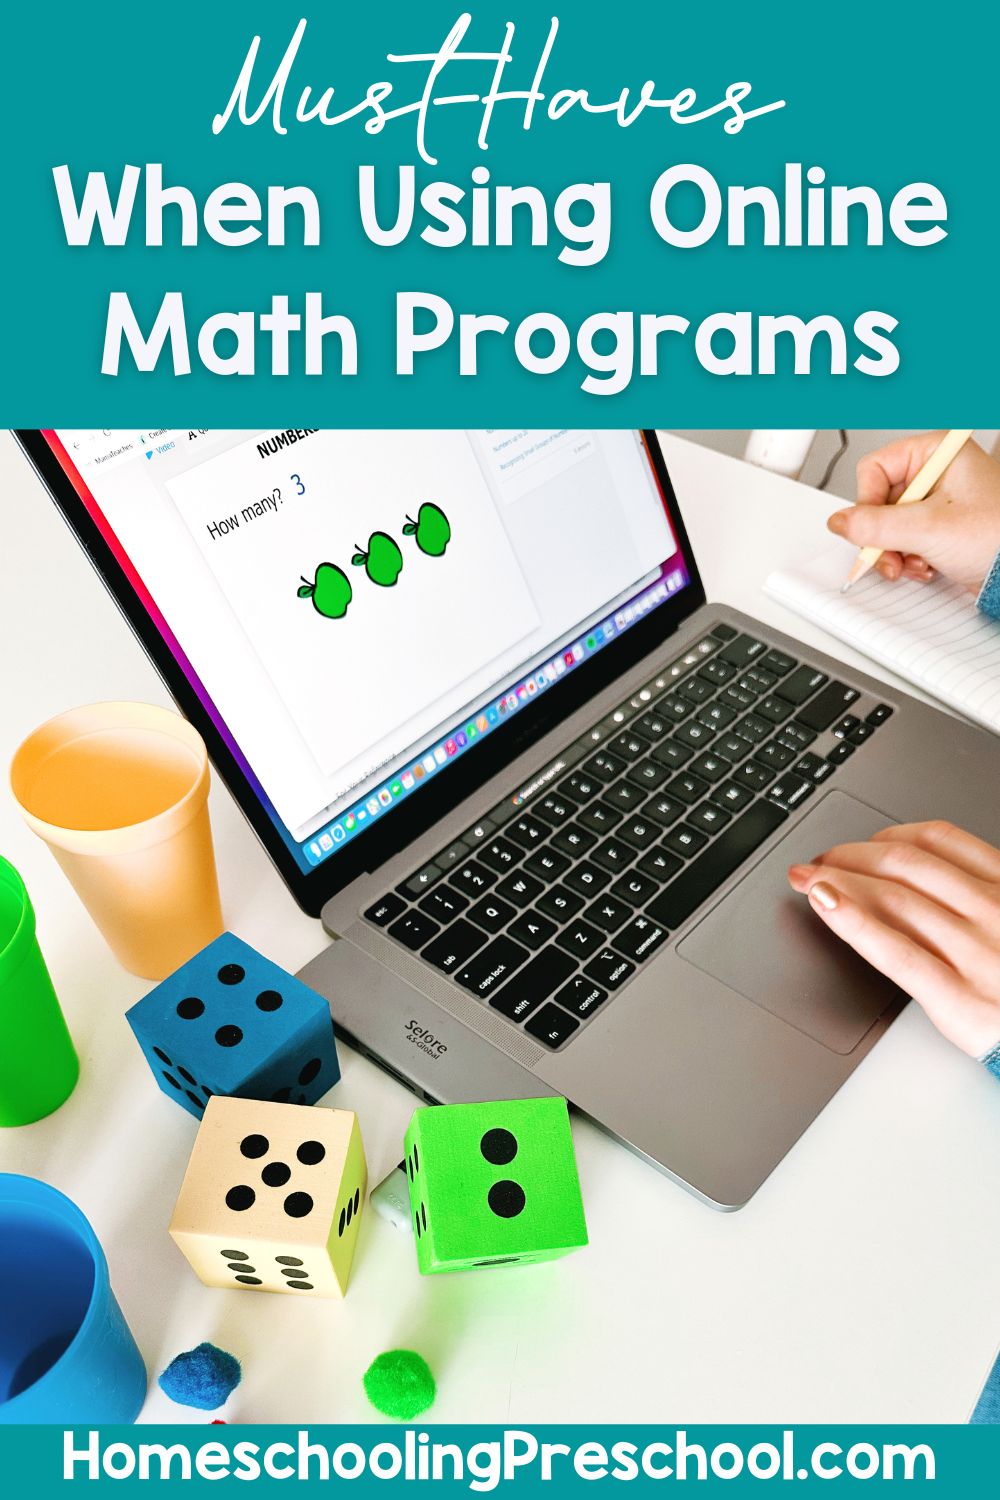 Must-Haves When Using Online Math Programs